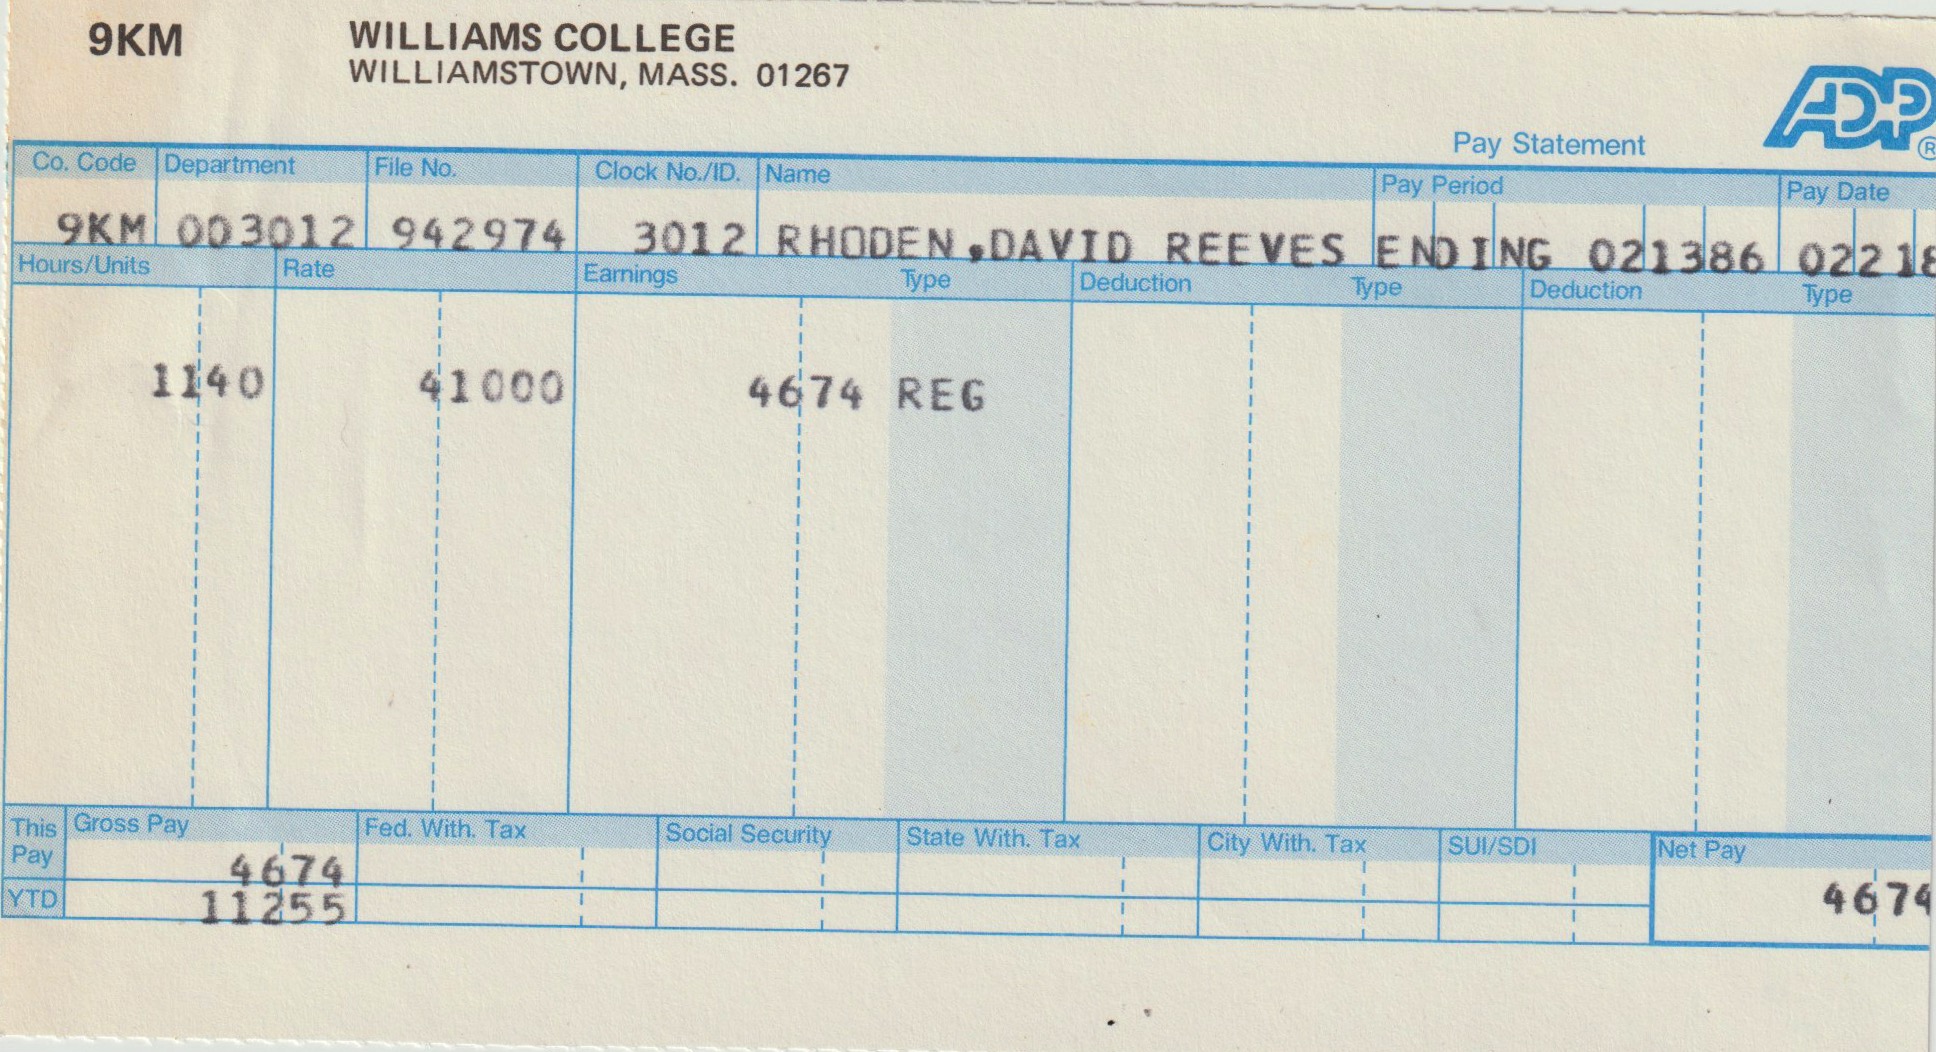 pay stub from Williams College dining hal, 1986.